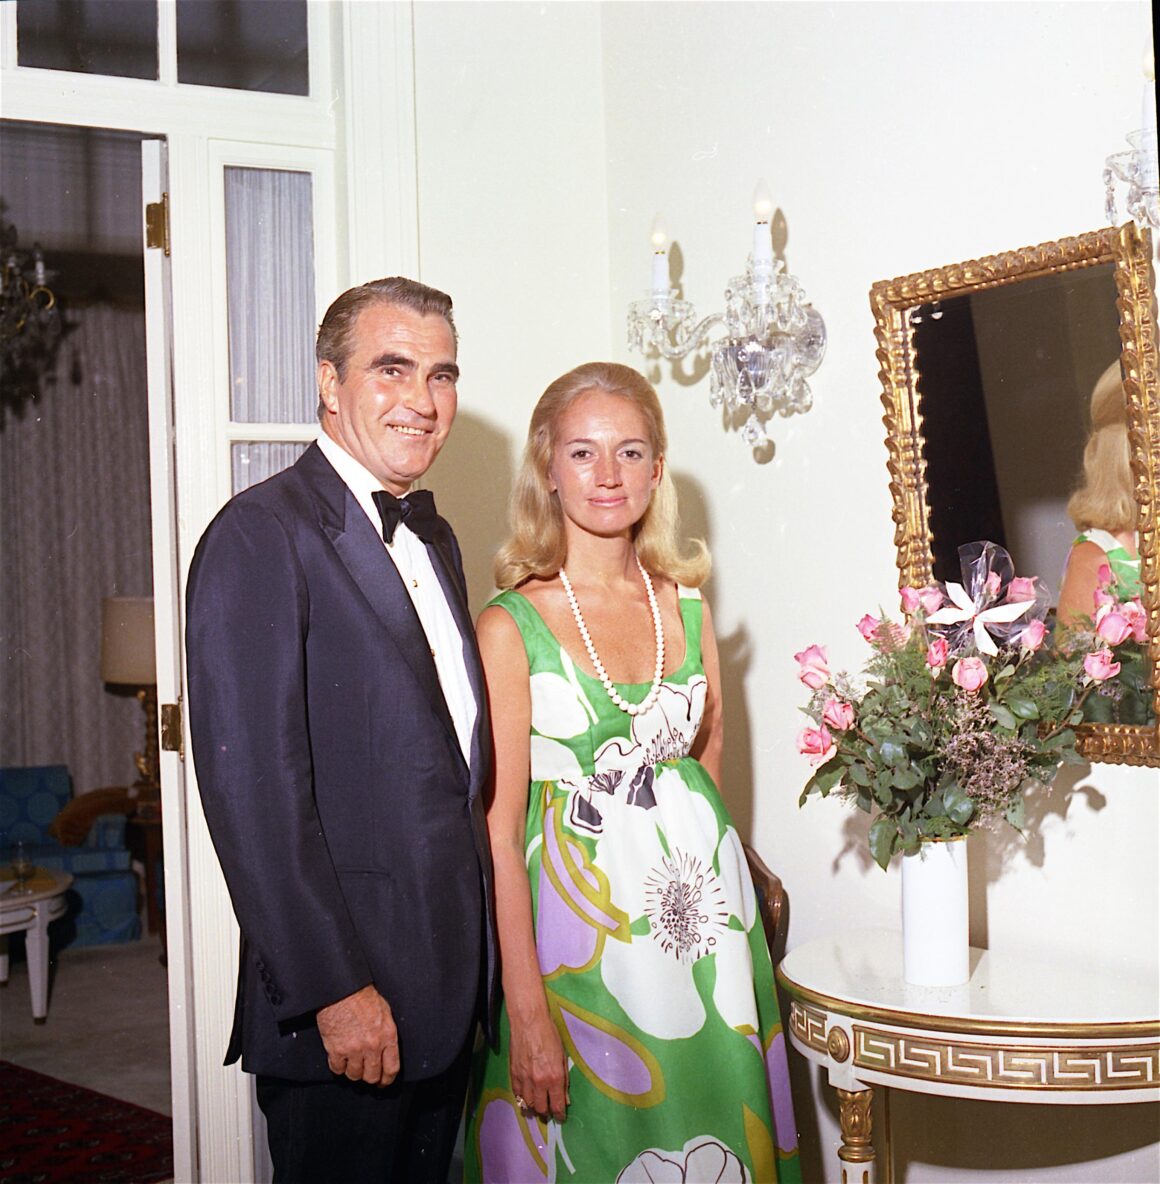 Harding Lawrence, President of Braniff, married Mary Wells in 1967, the year after she started her own advertising agency. Photo copyright Braniff Airways, Inc. All rights reserved.